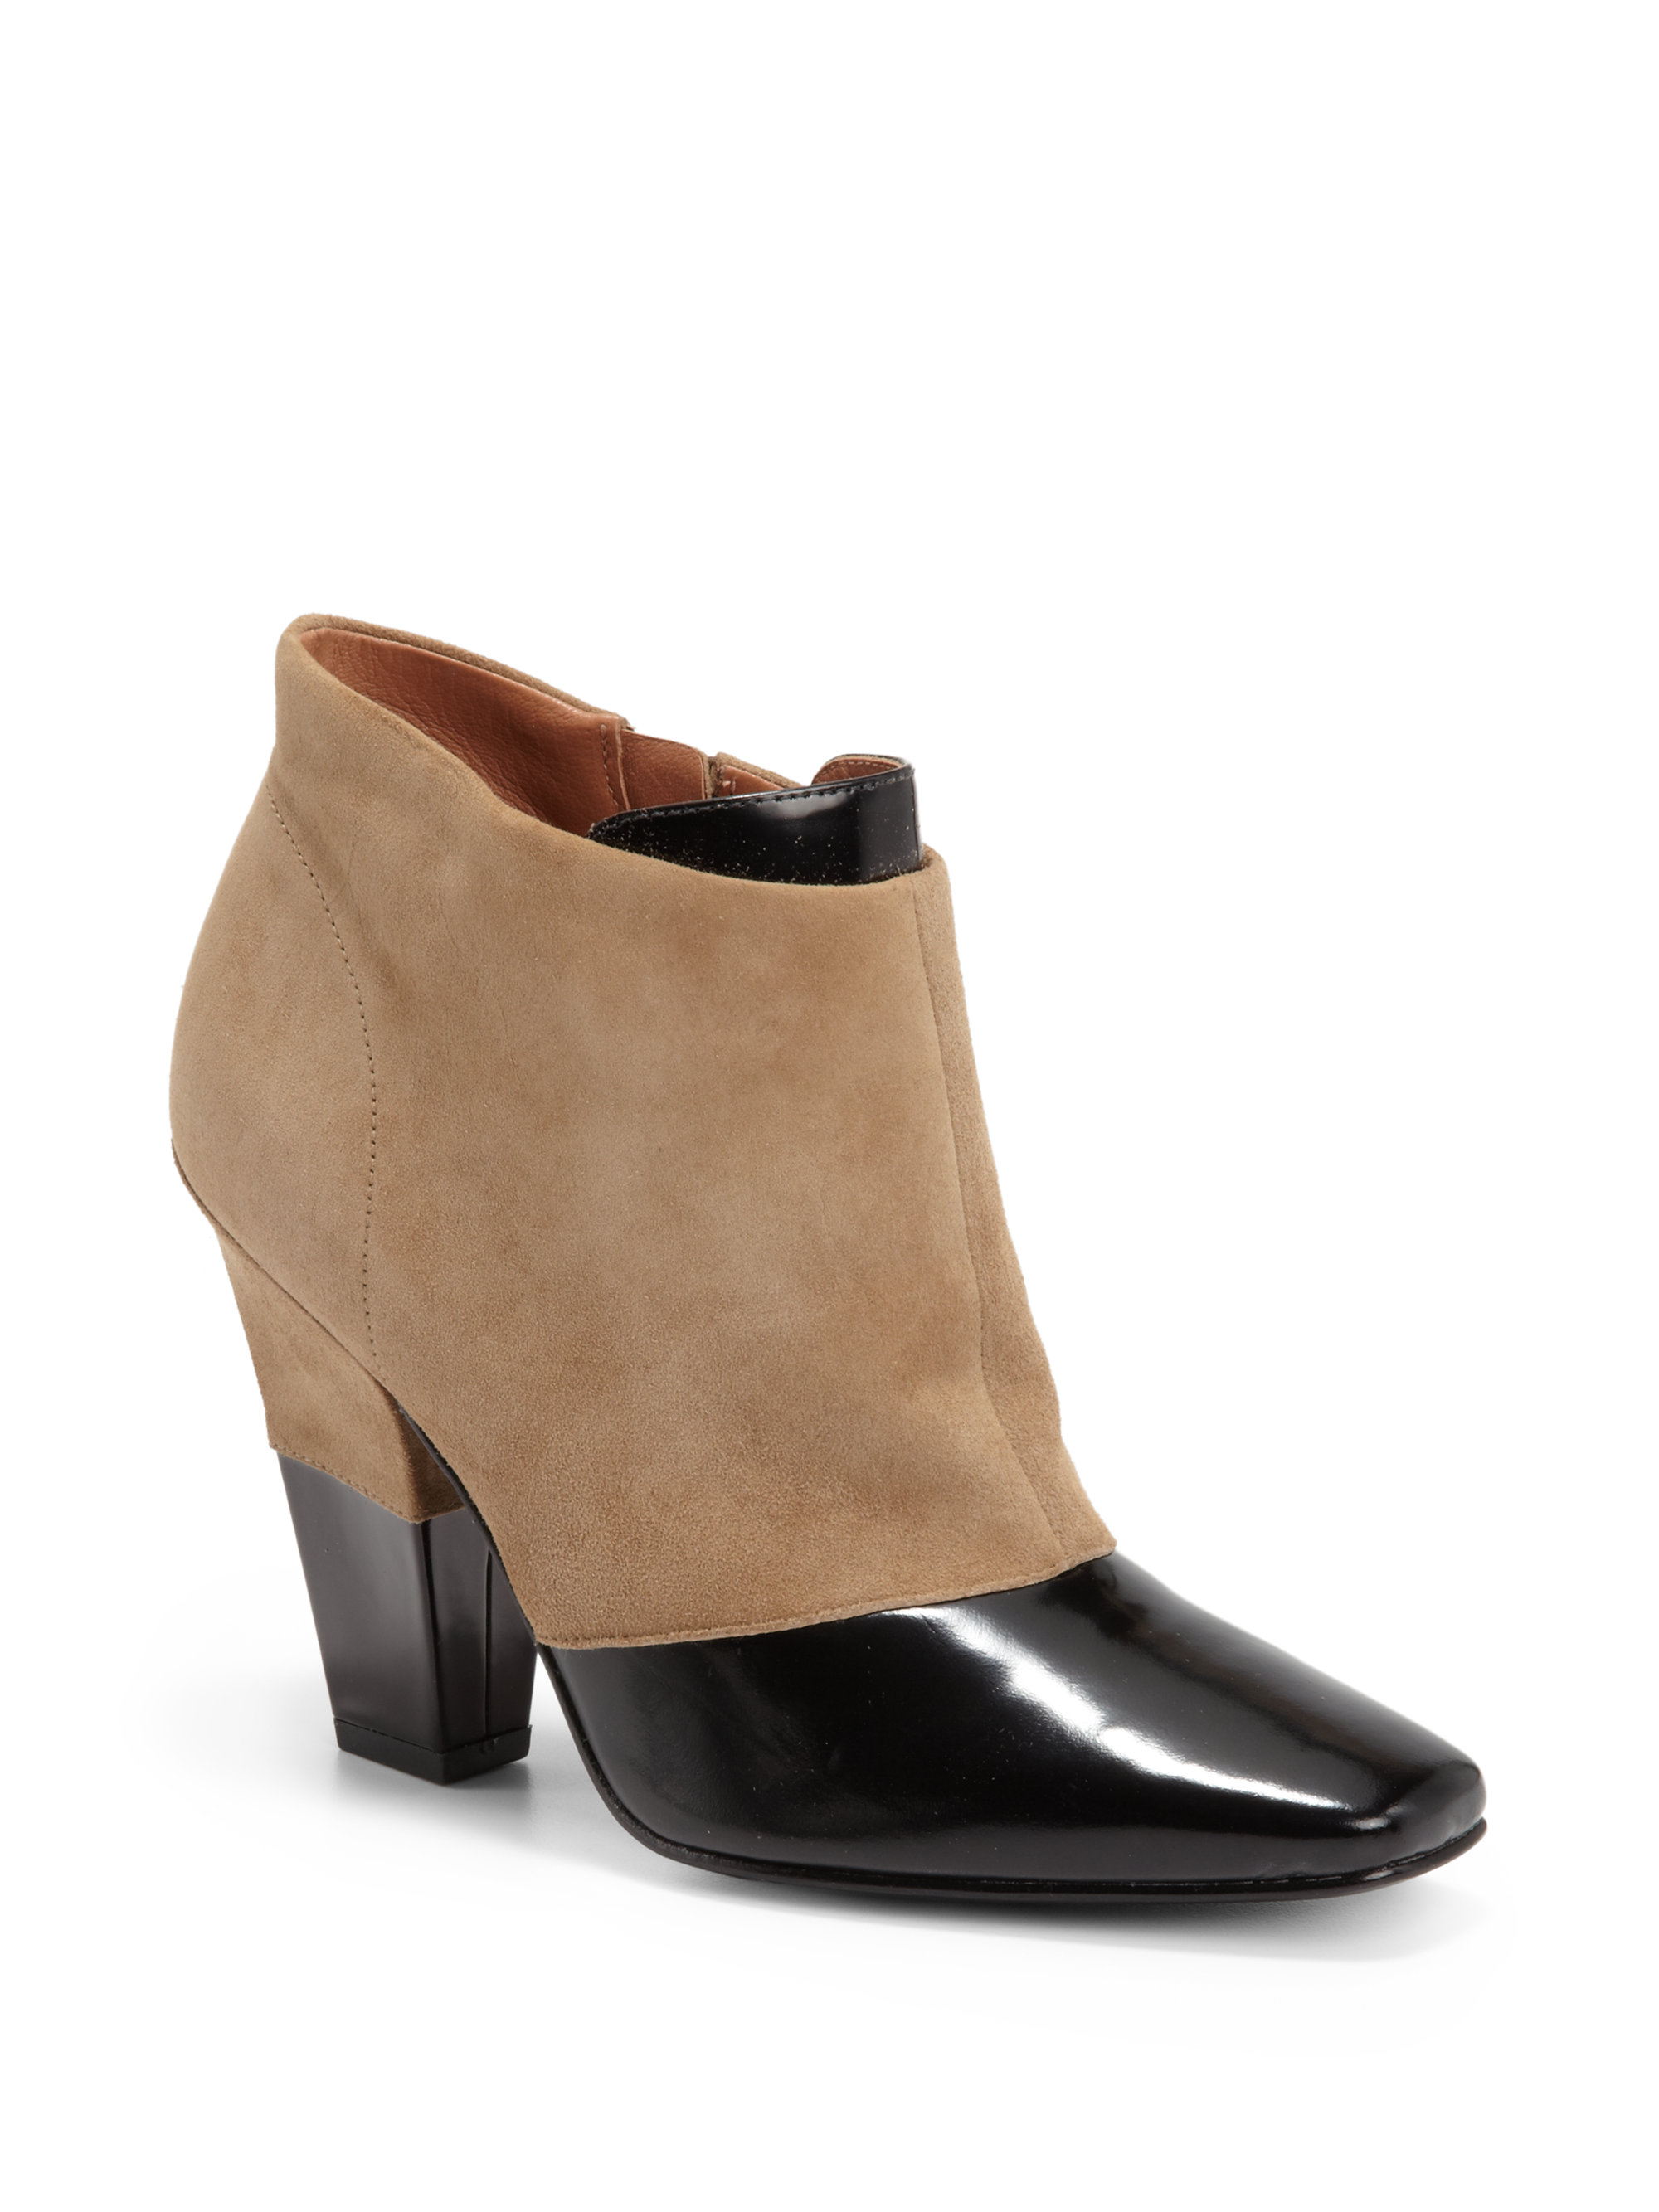 Sigerson Morrison Face Suede Leather Ankle Boots in Black (black beige ...